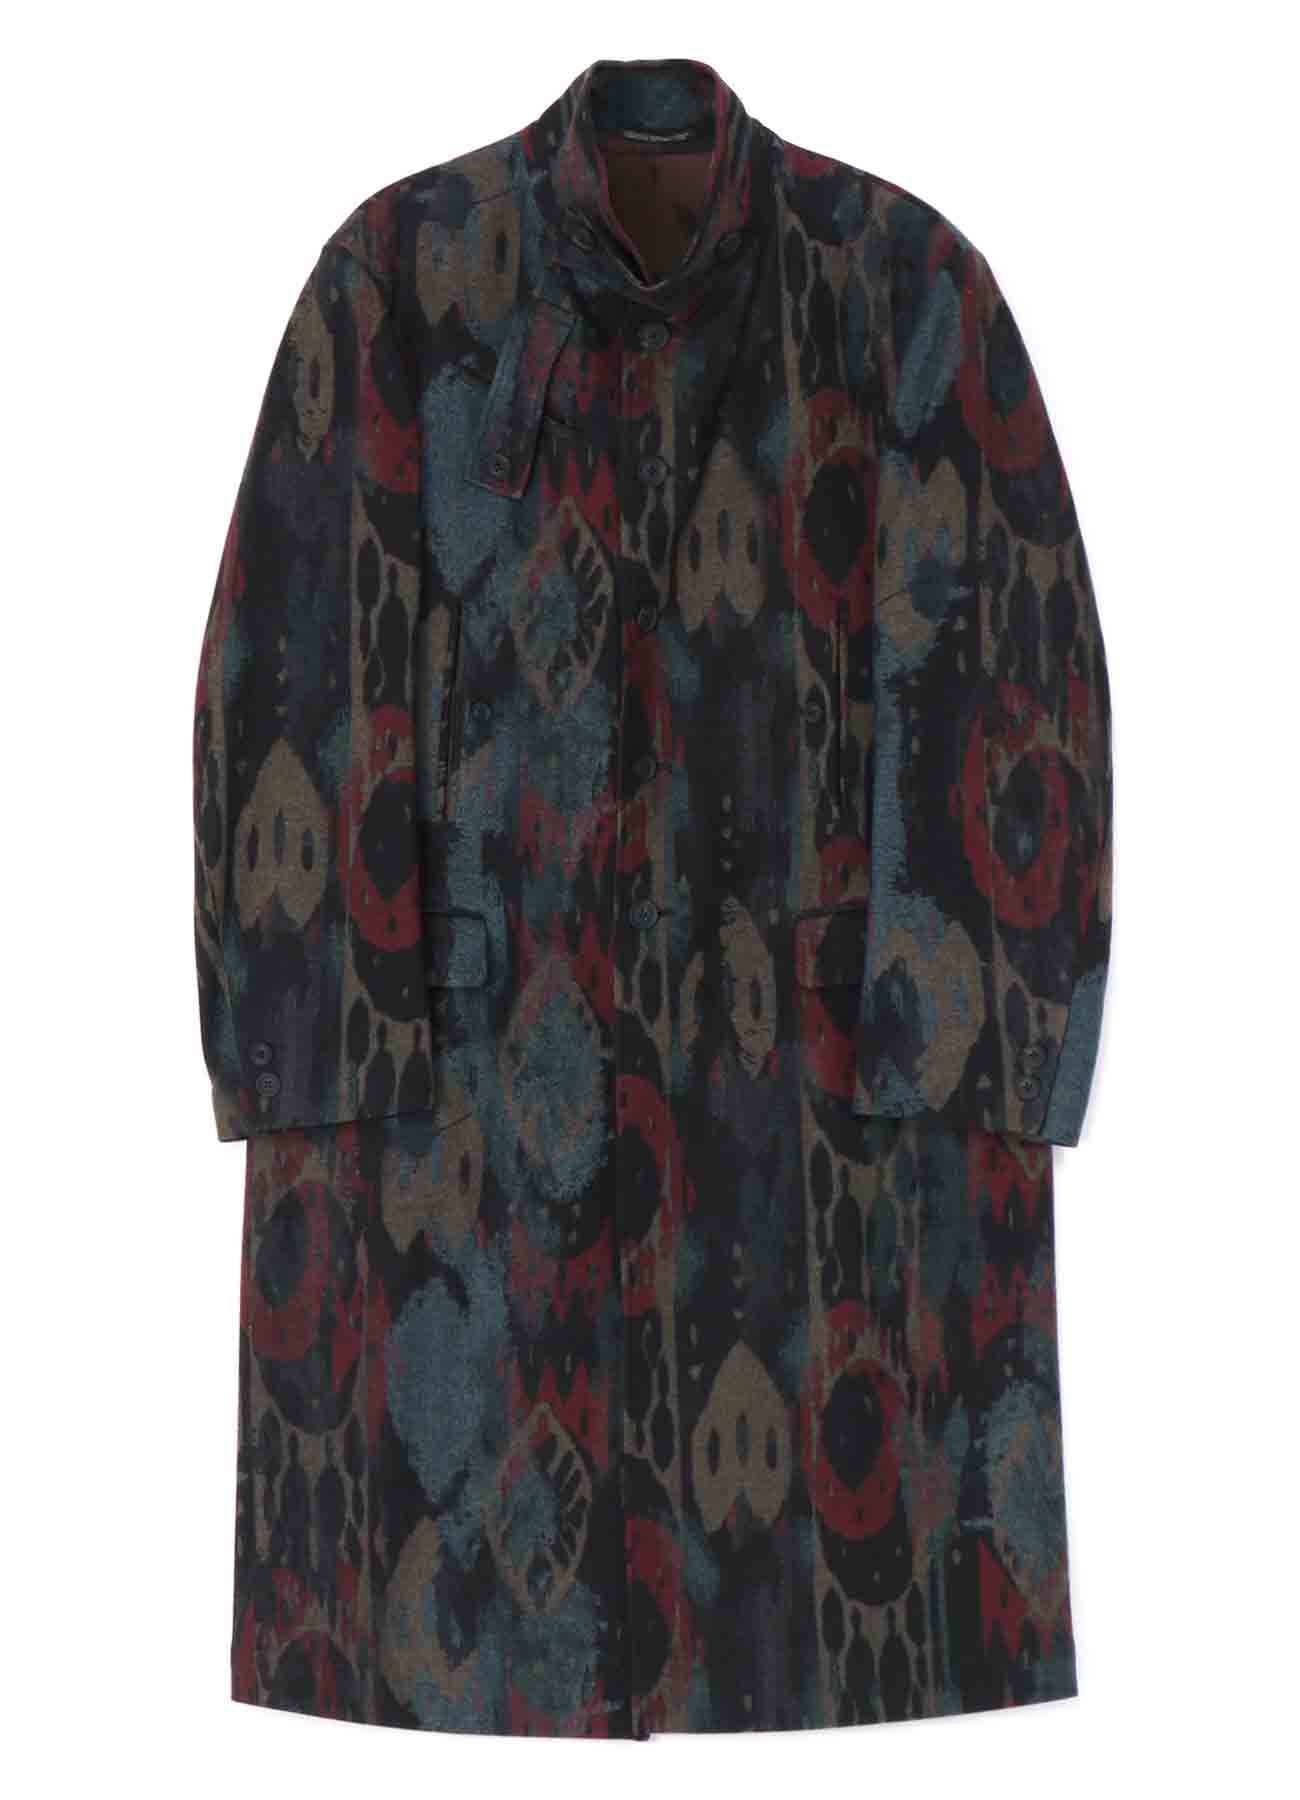 MULTI-COLORED ABSTRACT PATTERN STAND COLLAR COAT